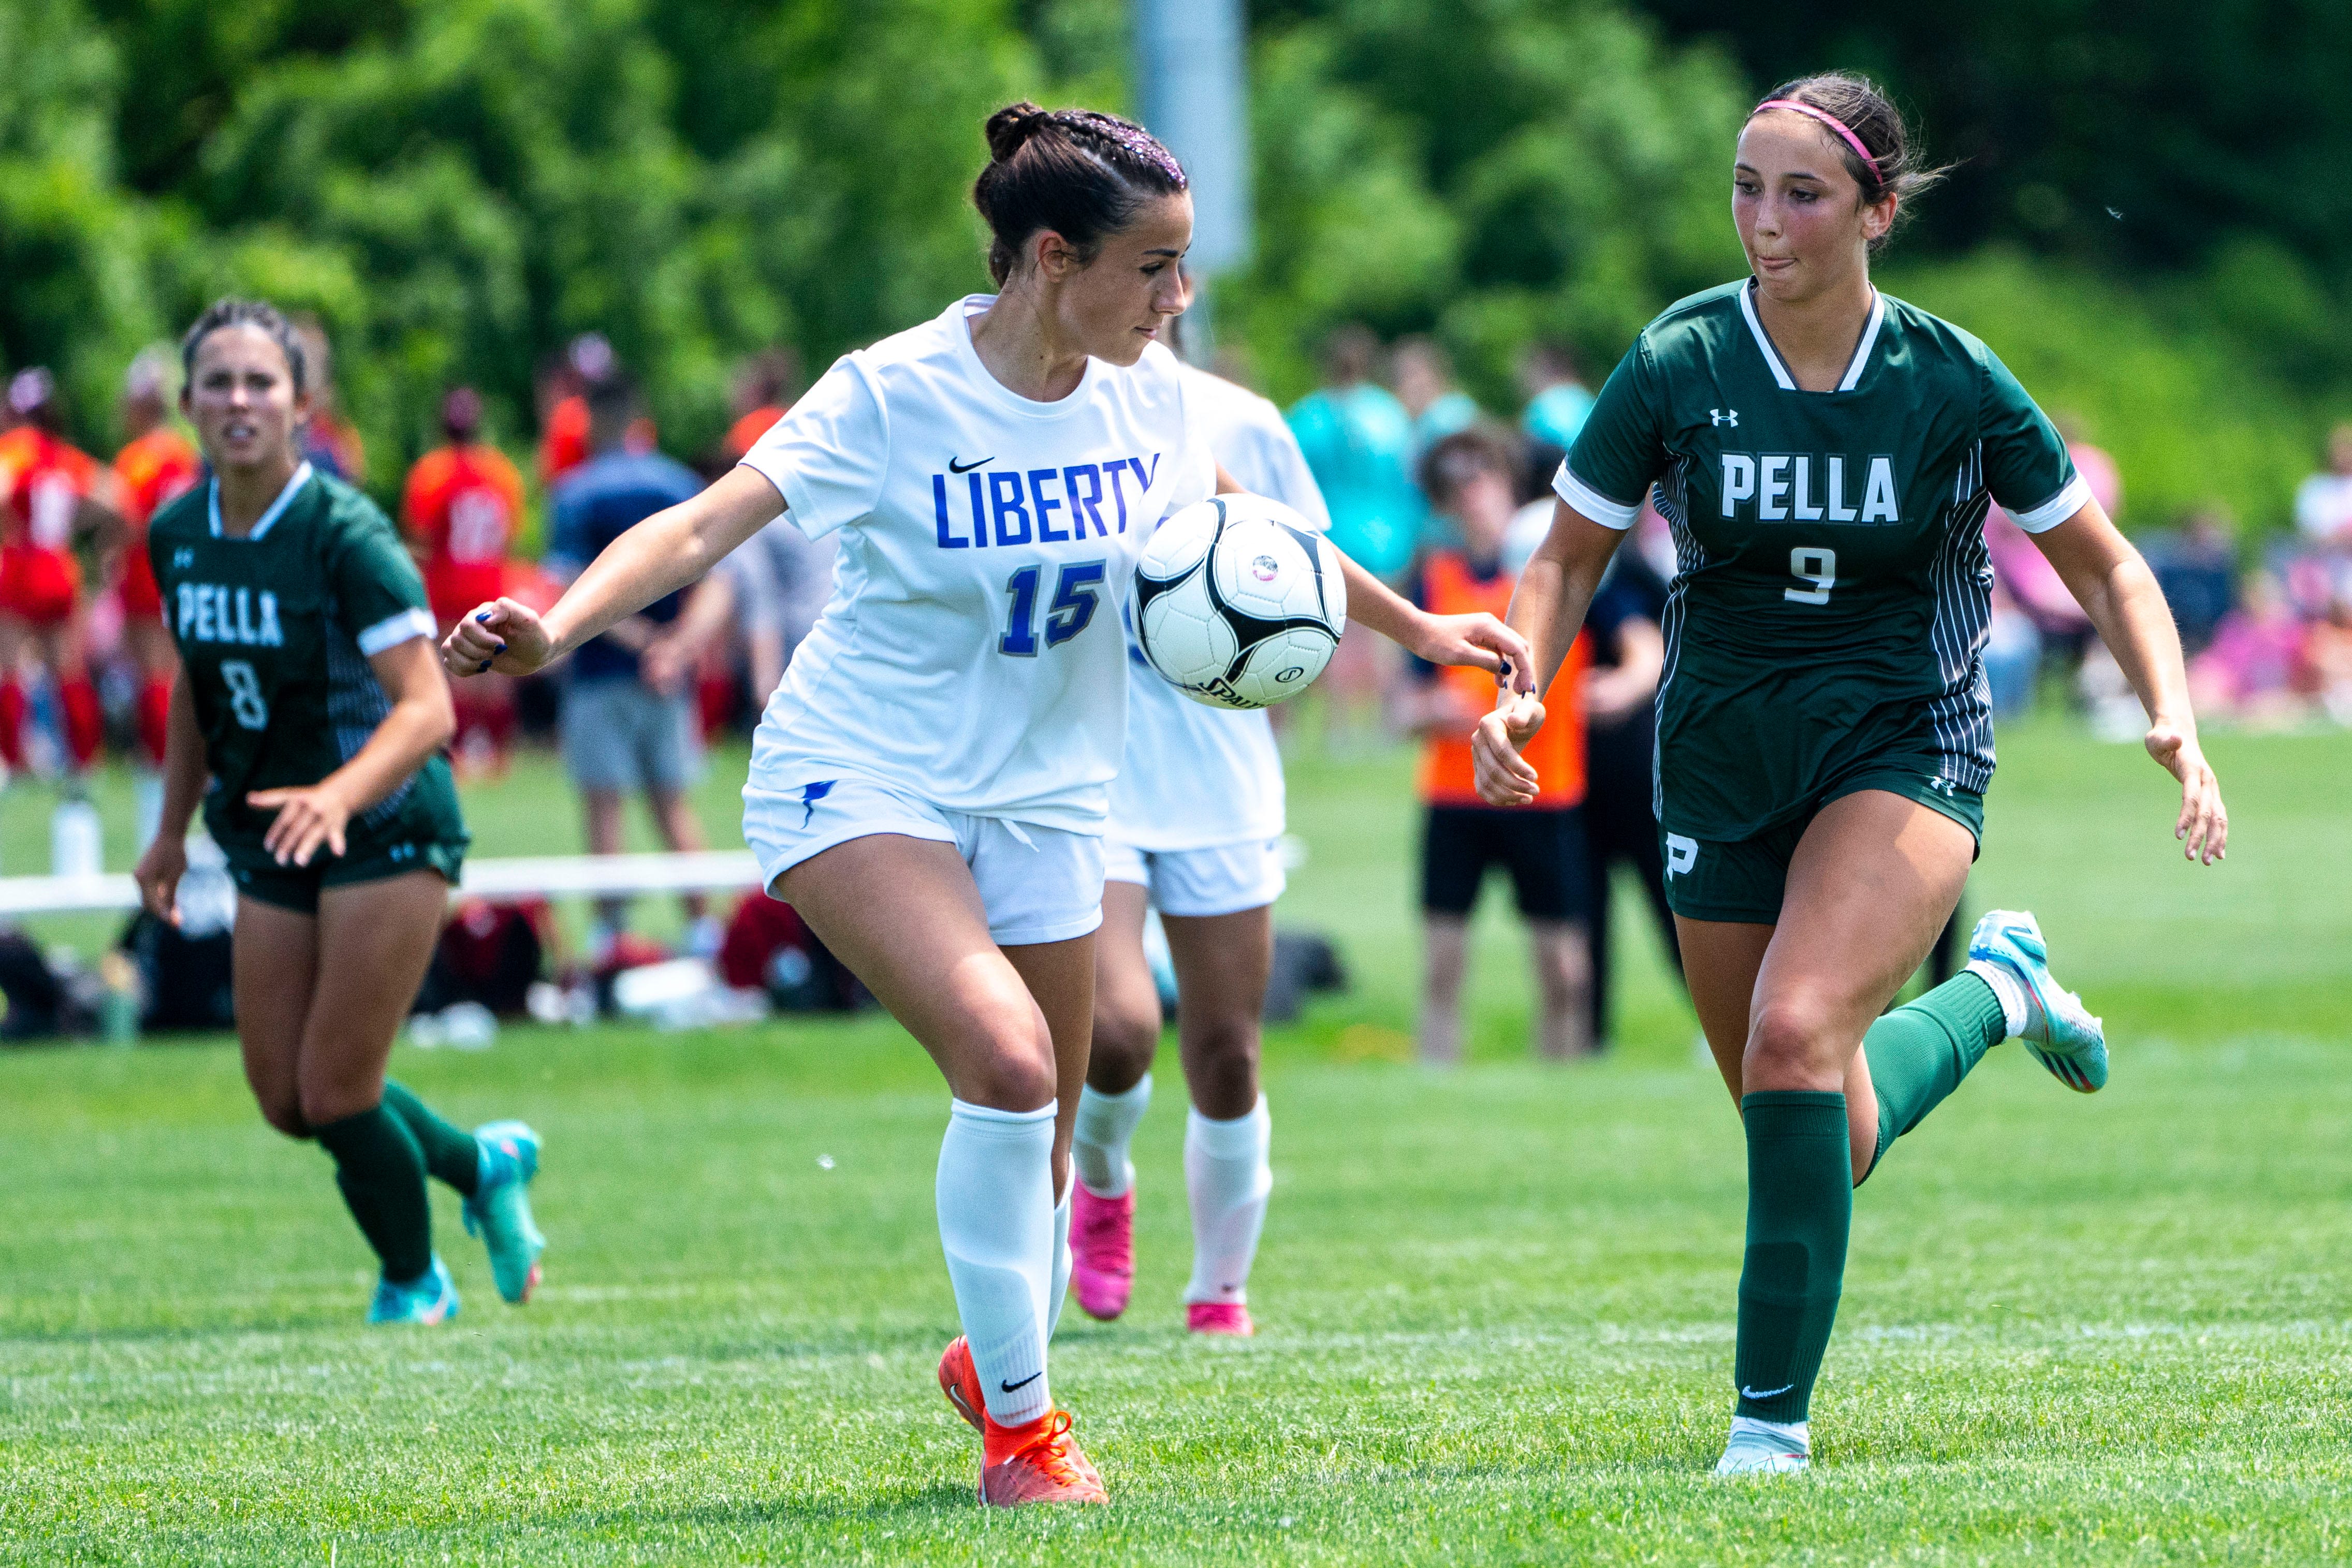 3 takeaways from Liberty girls soccer's season-ending loss to Pella in state quarterfinals.